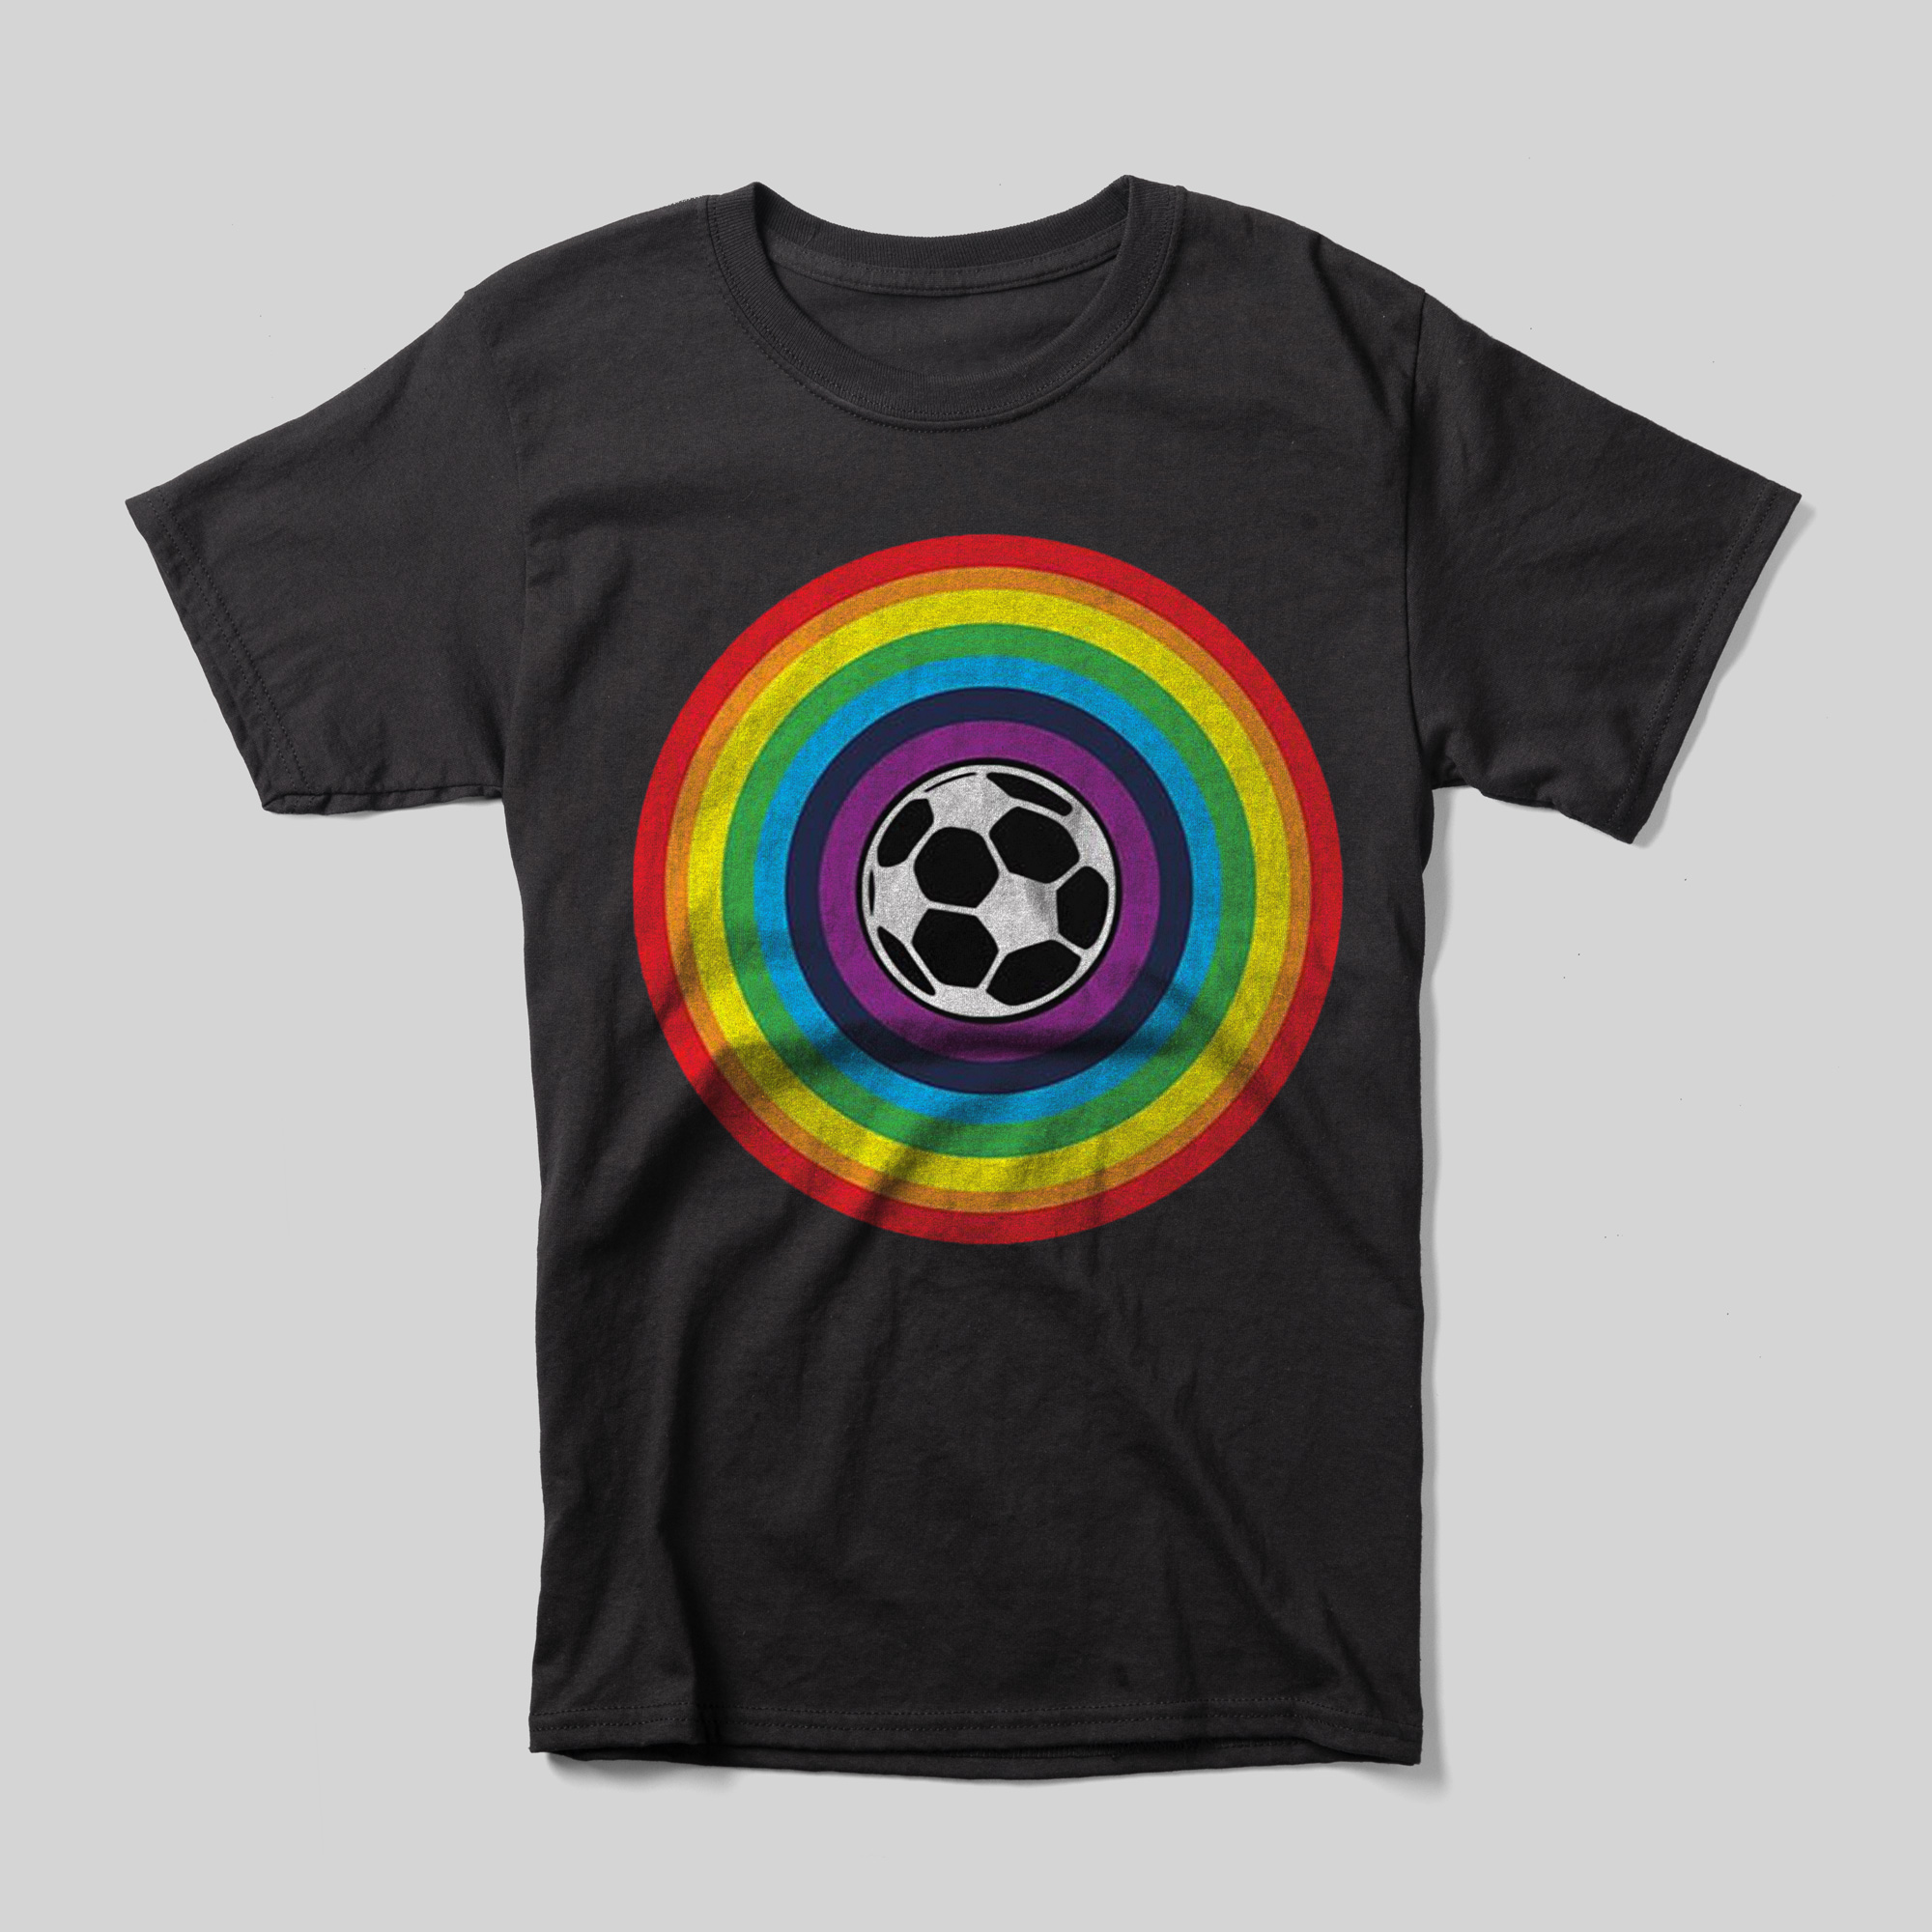 A black t-shirt showing a circular rainbow with a soccer ball in the center.